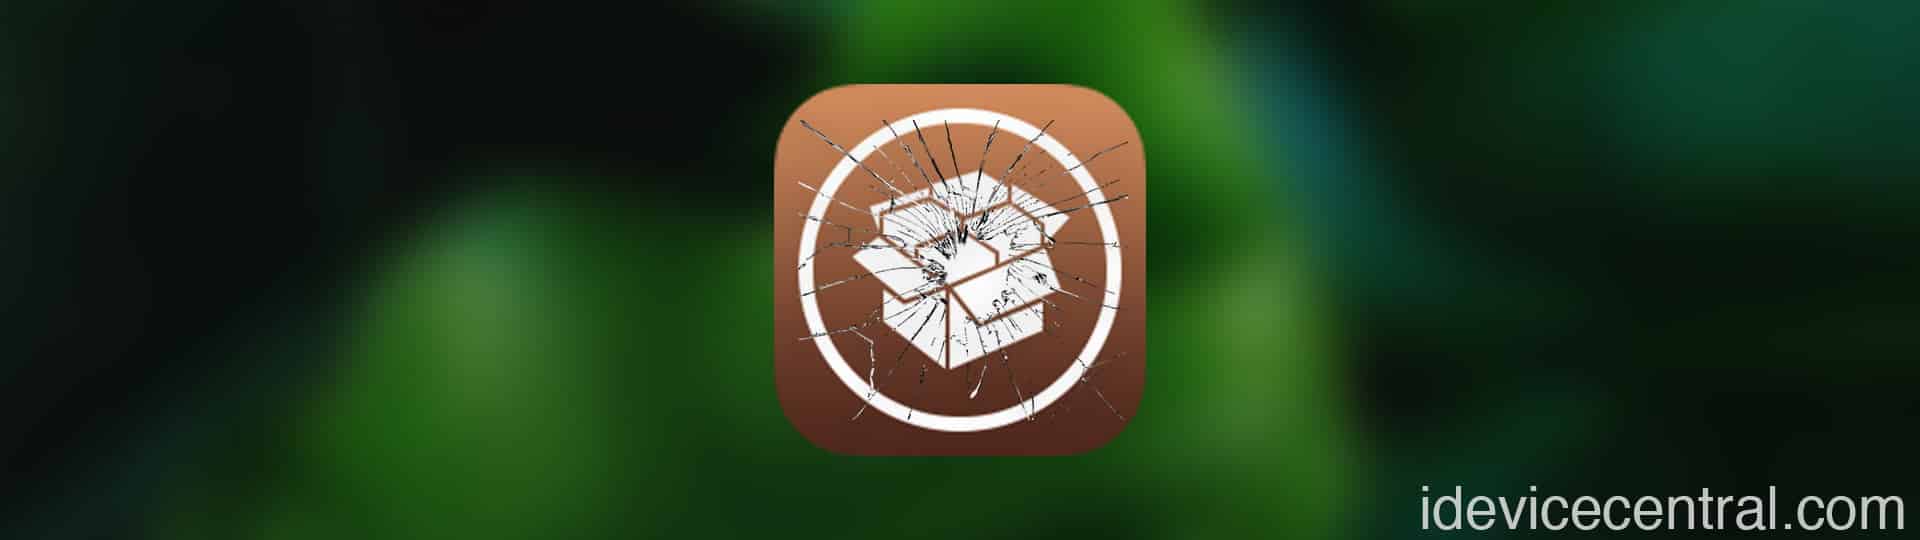 A Comprehensive Guide to Fixing Common iOS Jailbreak Issues on iOS 14 - iOS 16